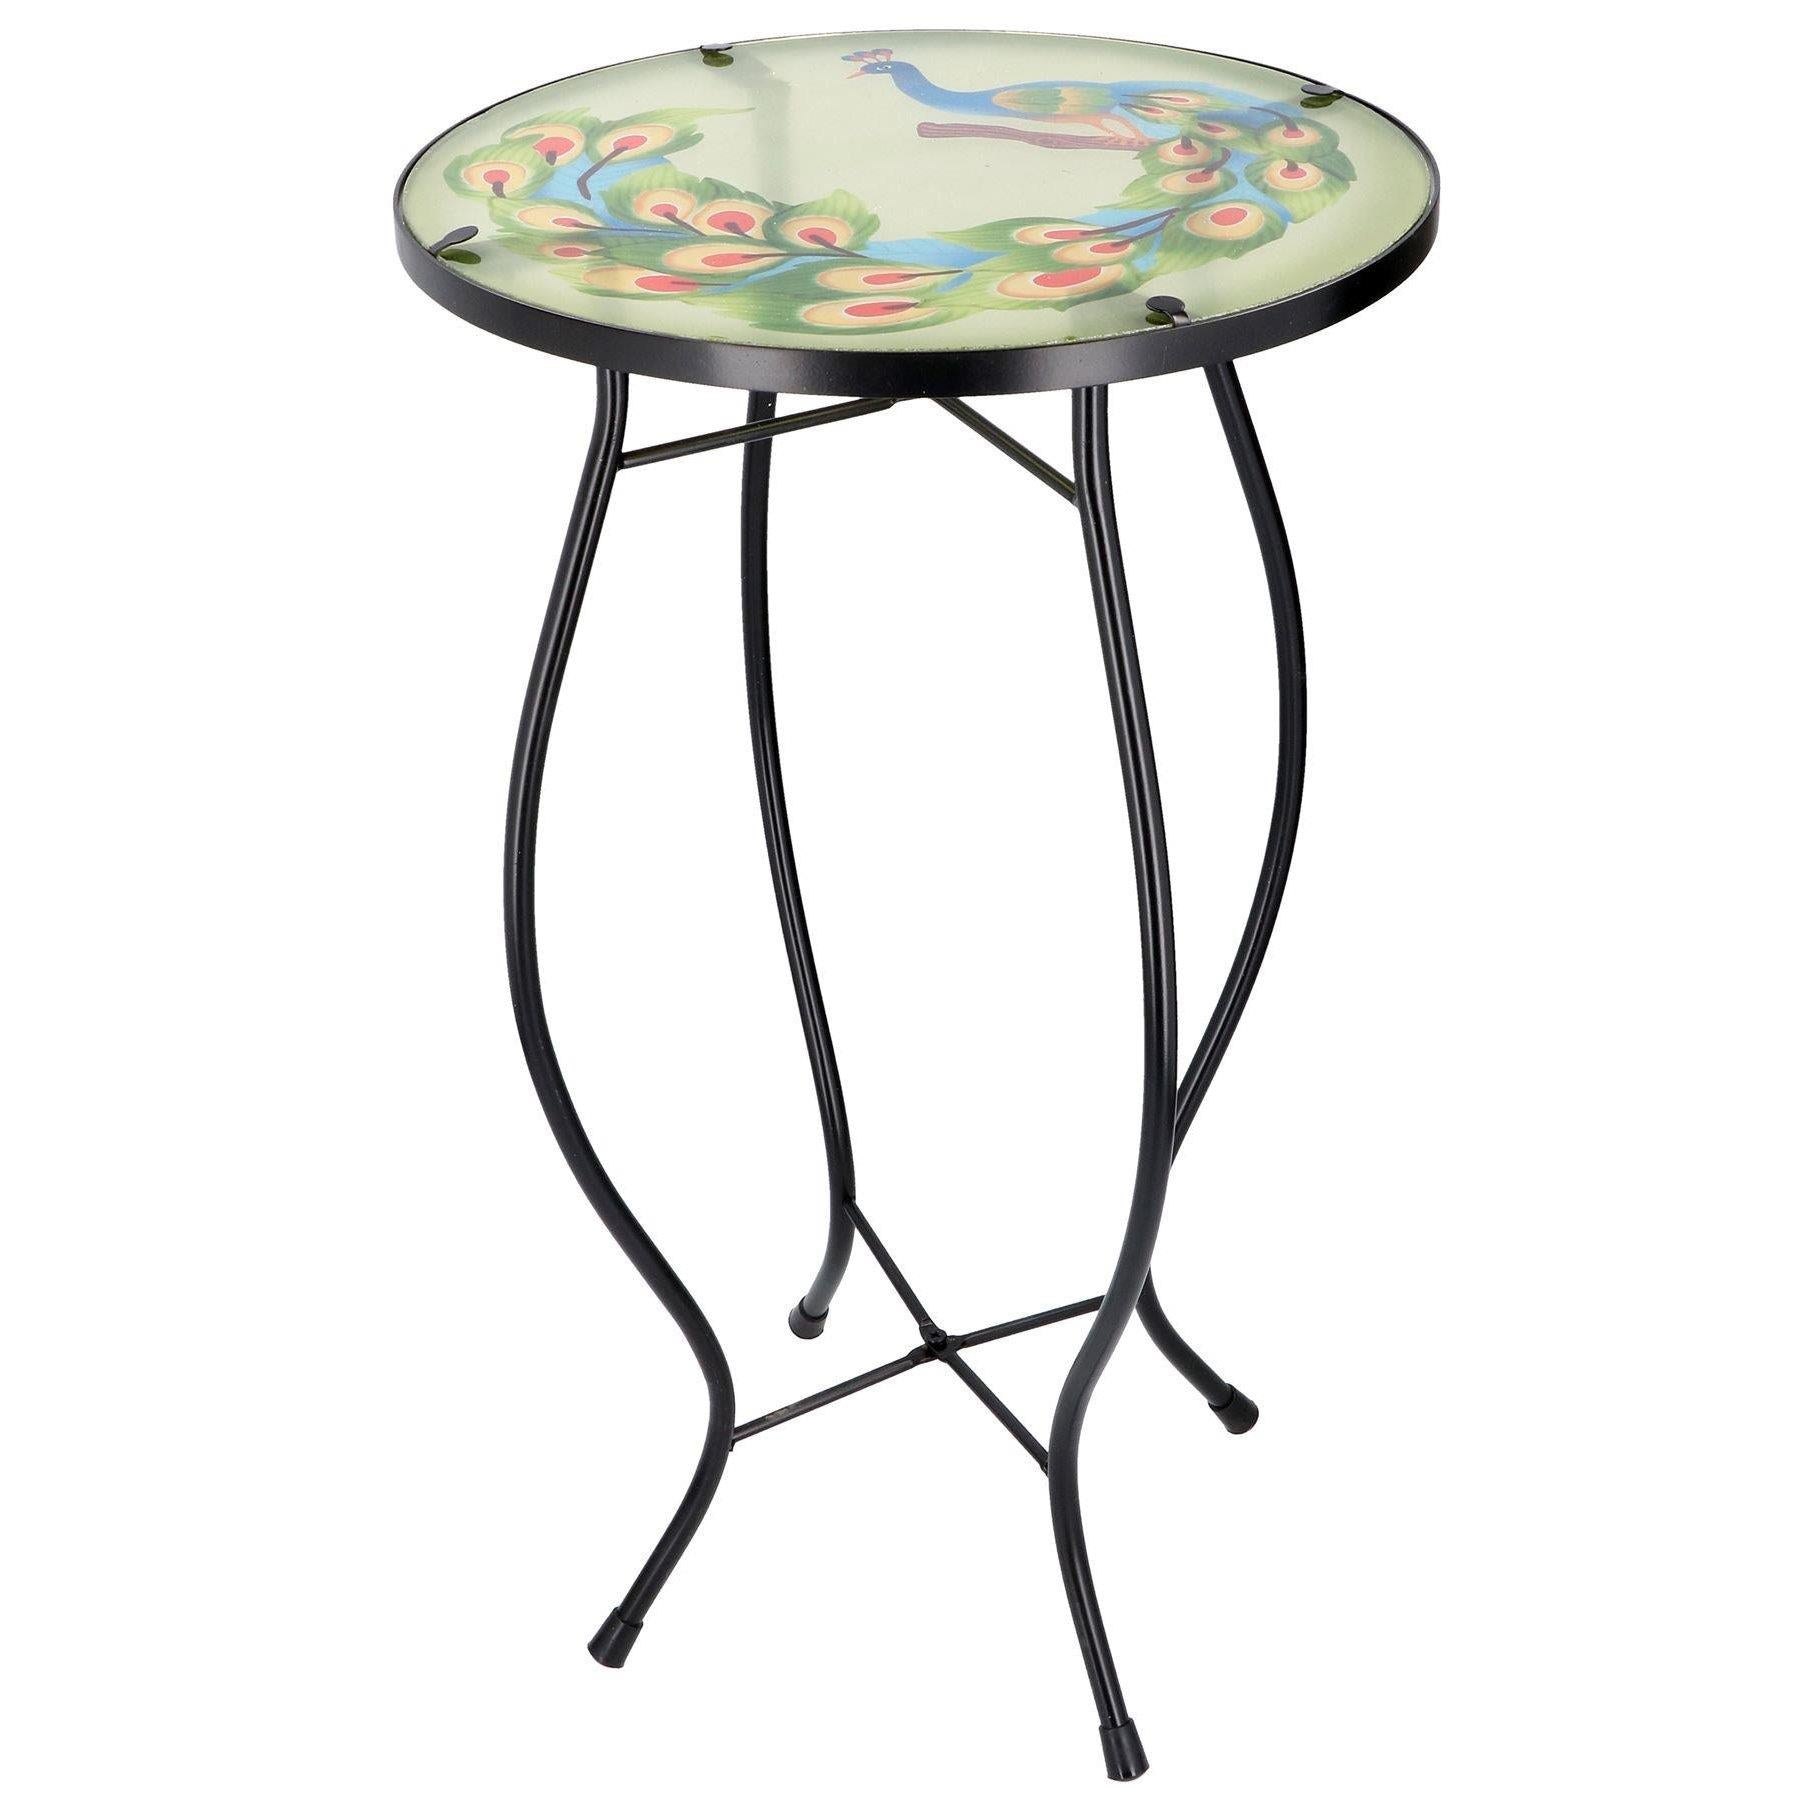 GEEZY table Round Side Mosaic Table With Peacock Design